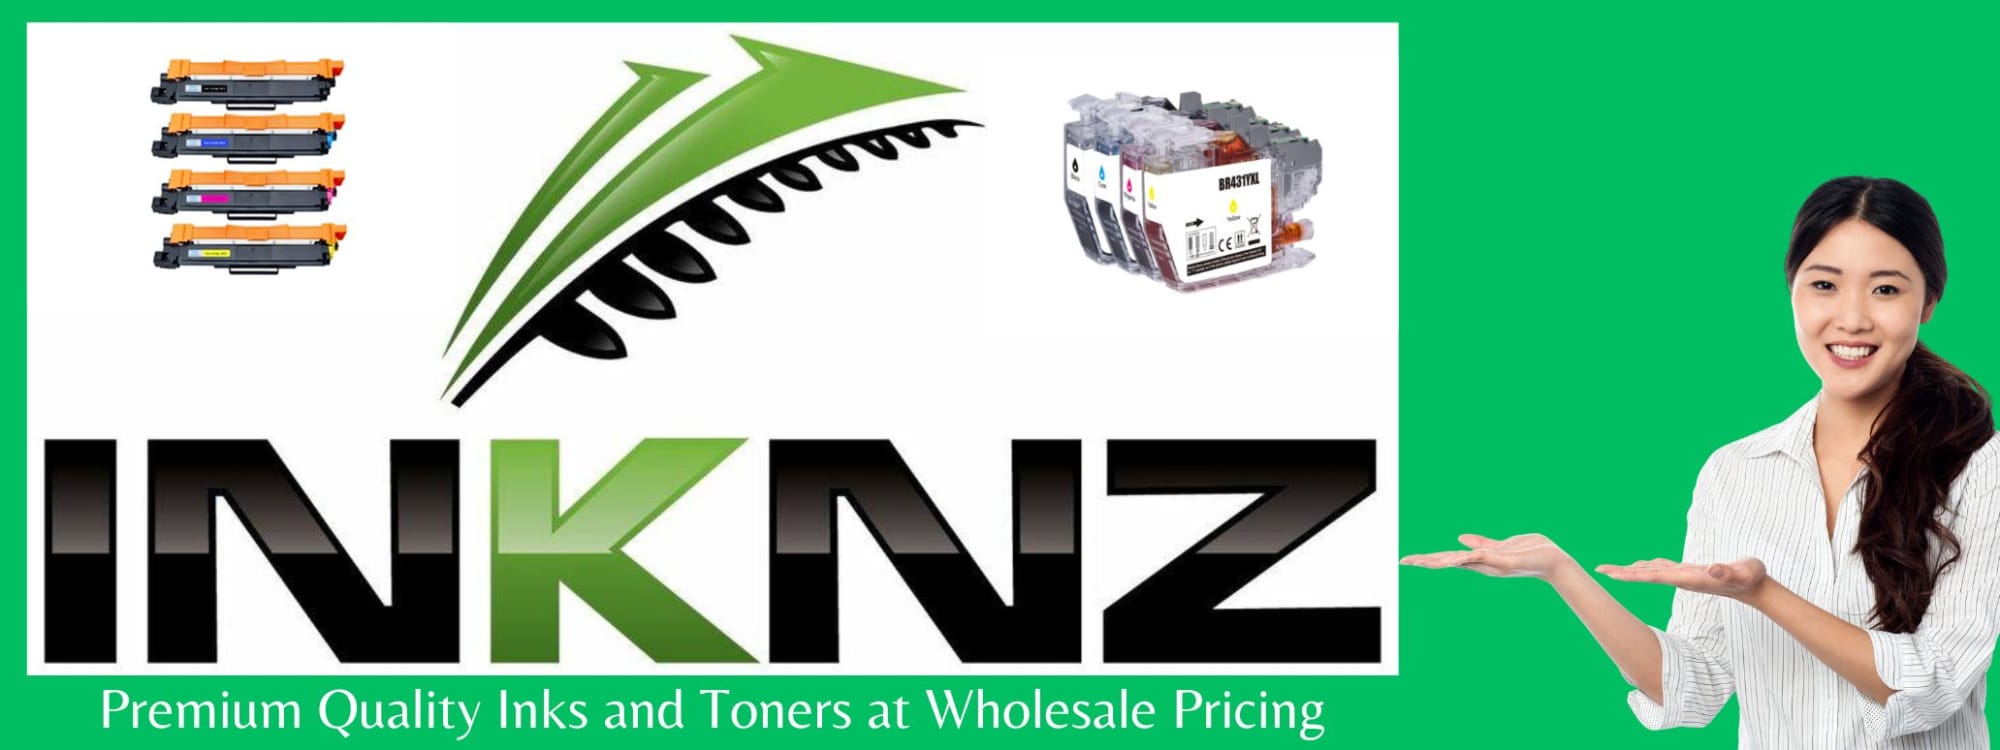 INKNZ - Premium Quality Inks and Toners at Wholesale Pricing